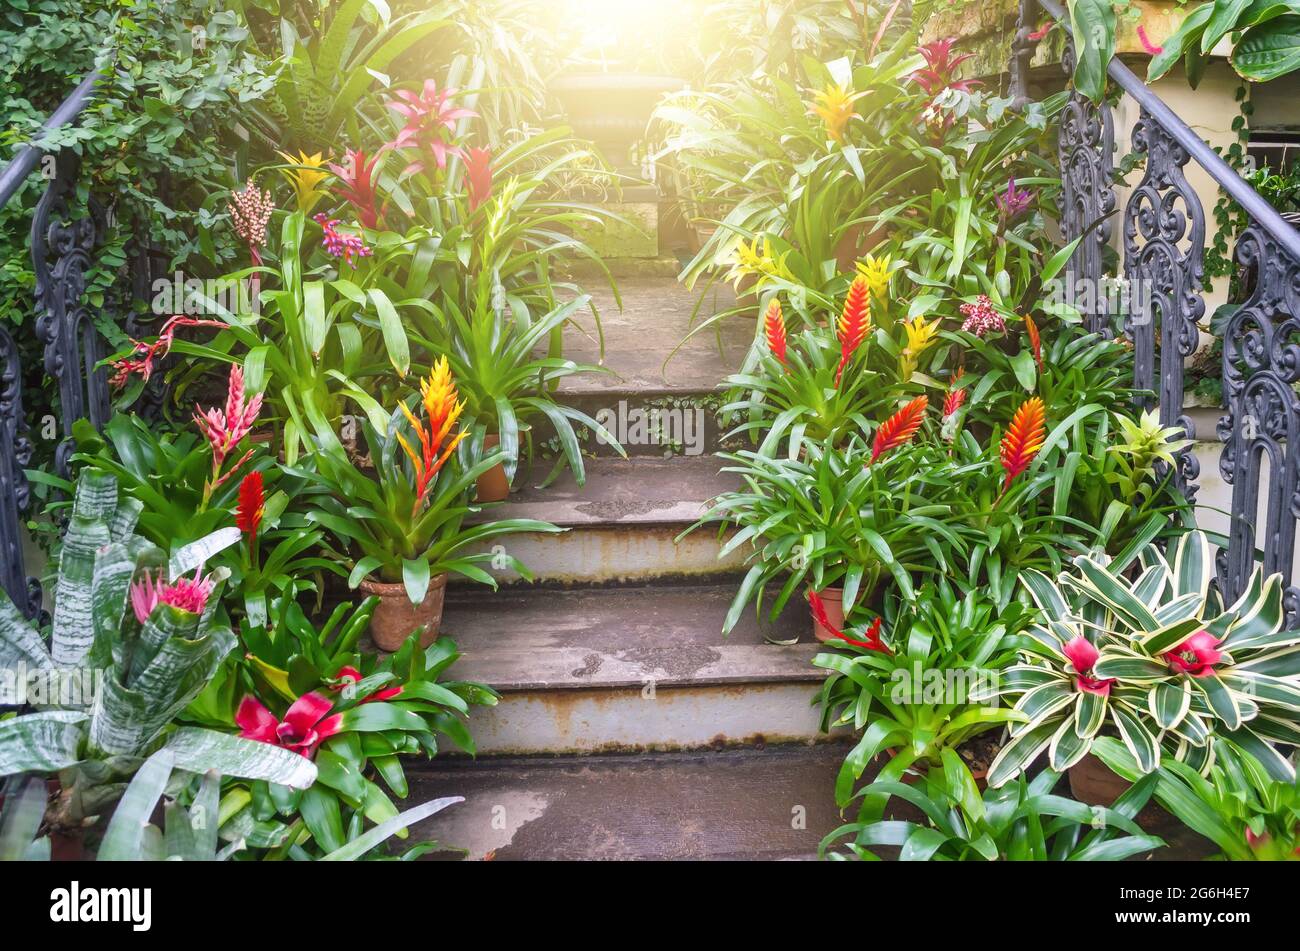 Flowering vriesea plants in pots on the stairs of tropical moist forest Stock Photo